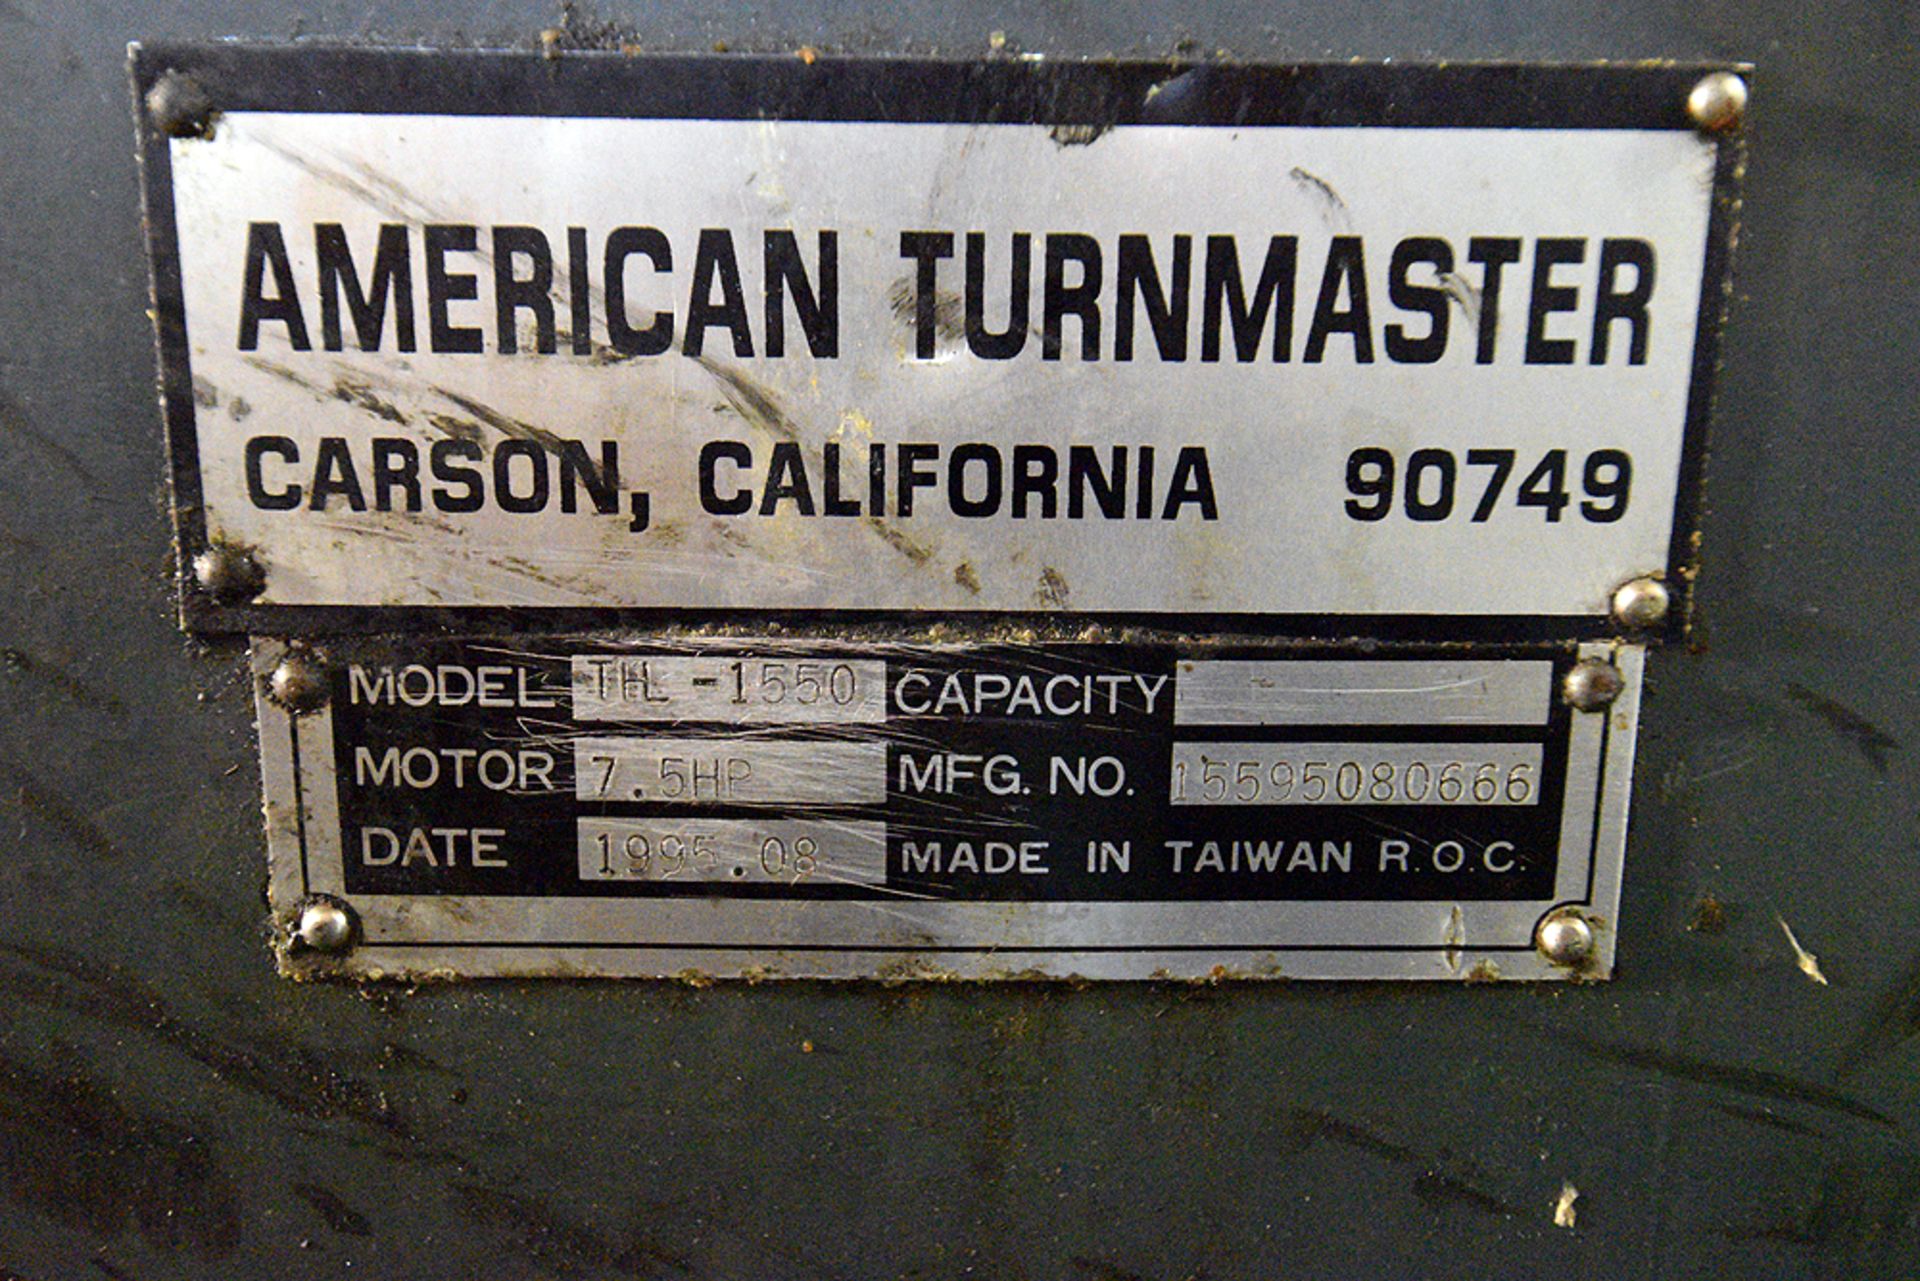 American Turnmaster 15"x50" Lathe ,Model THL-1550, w/Sony LH52 Magnescale Readout - Image 7 of 7